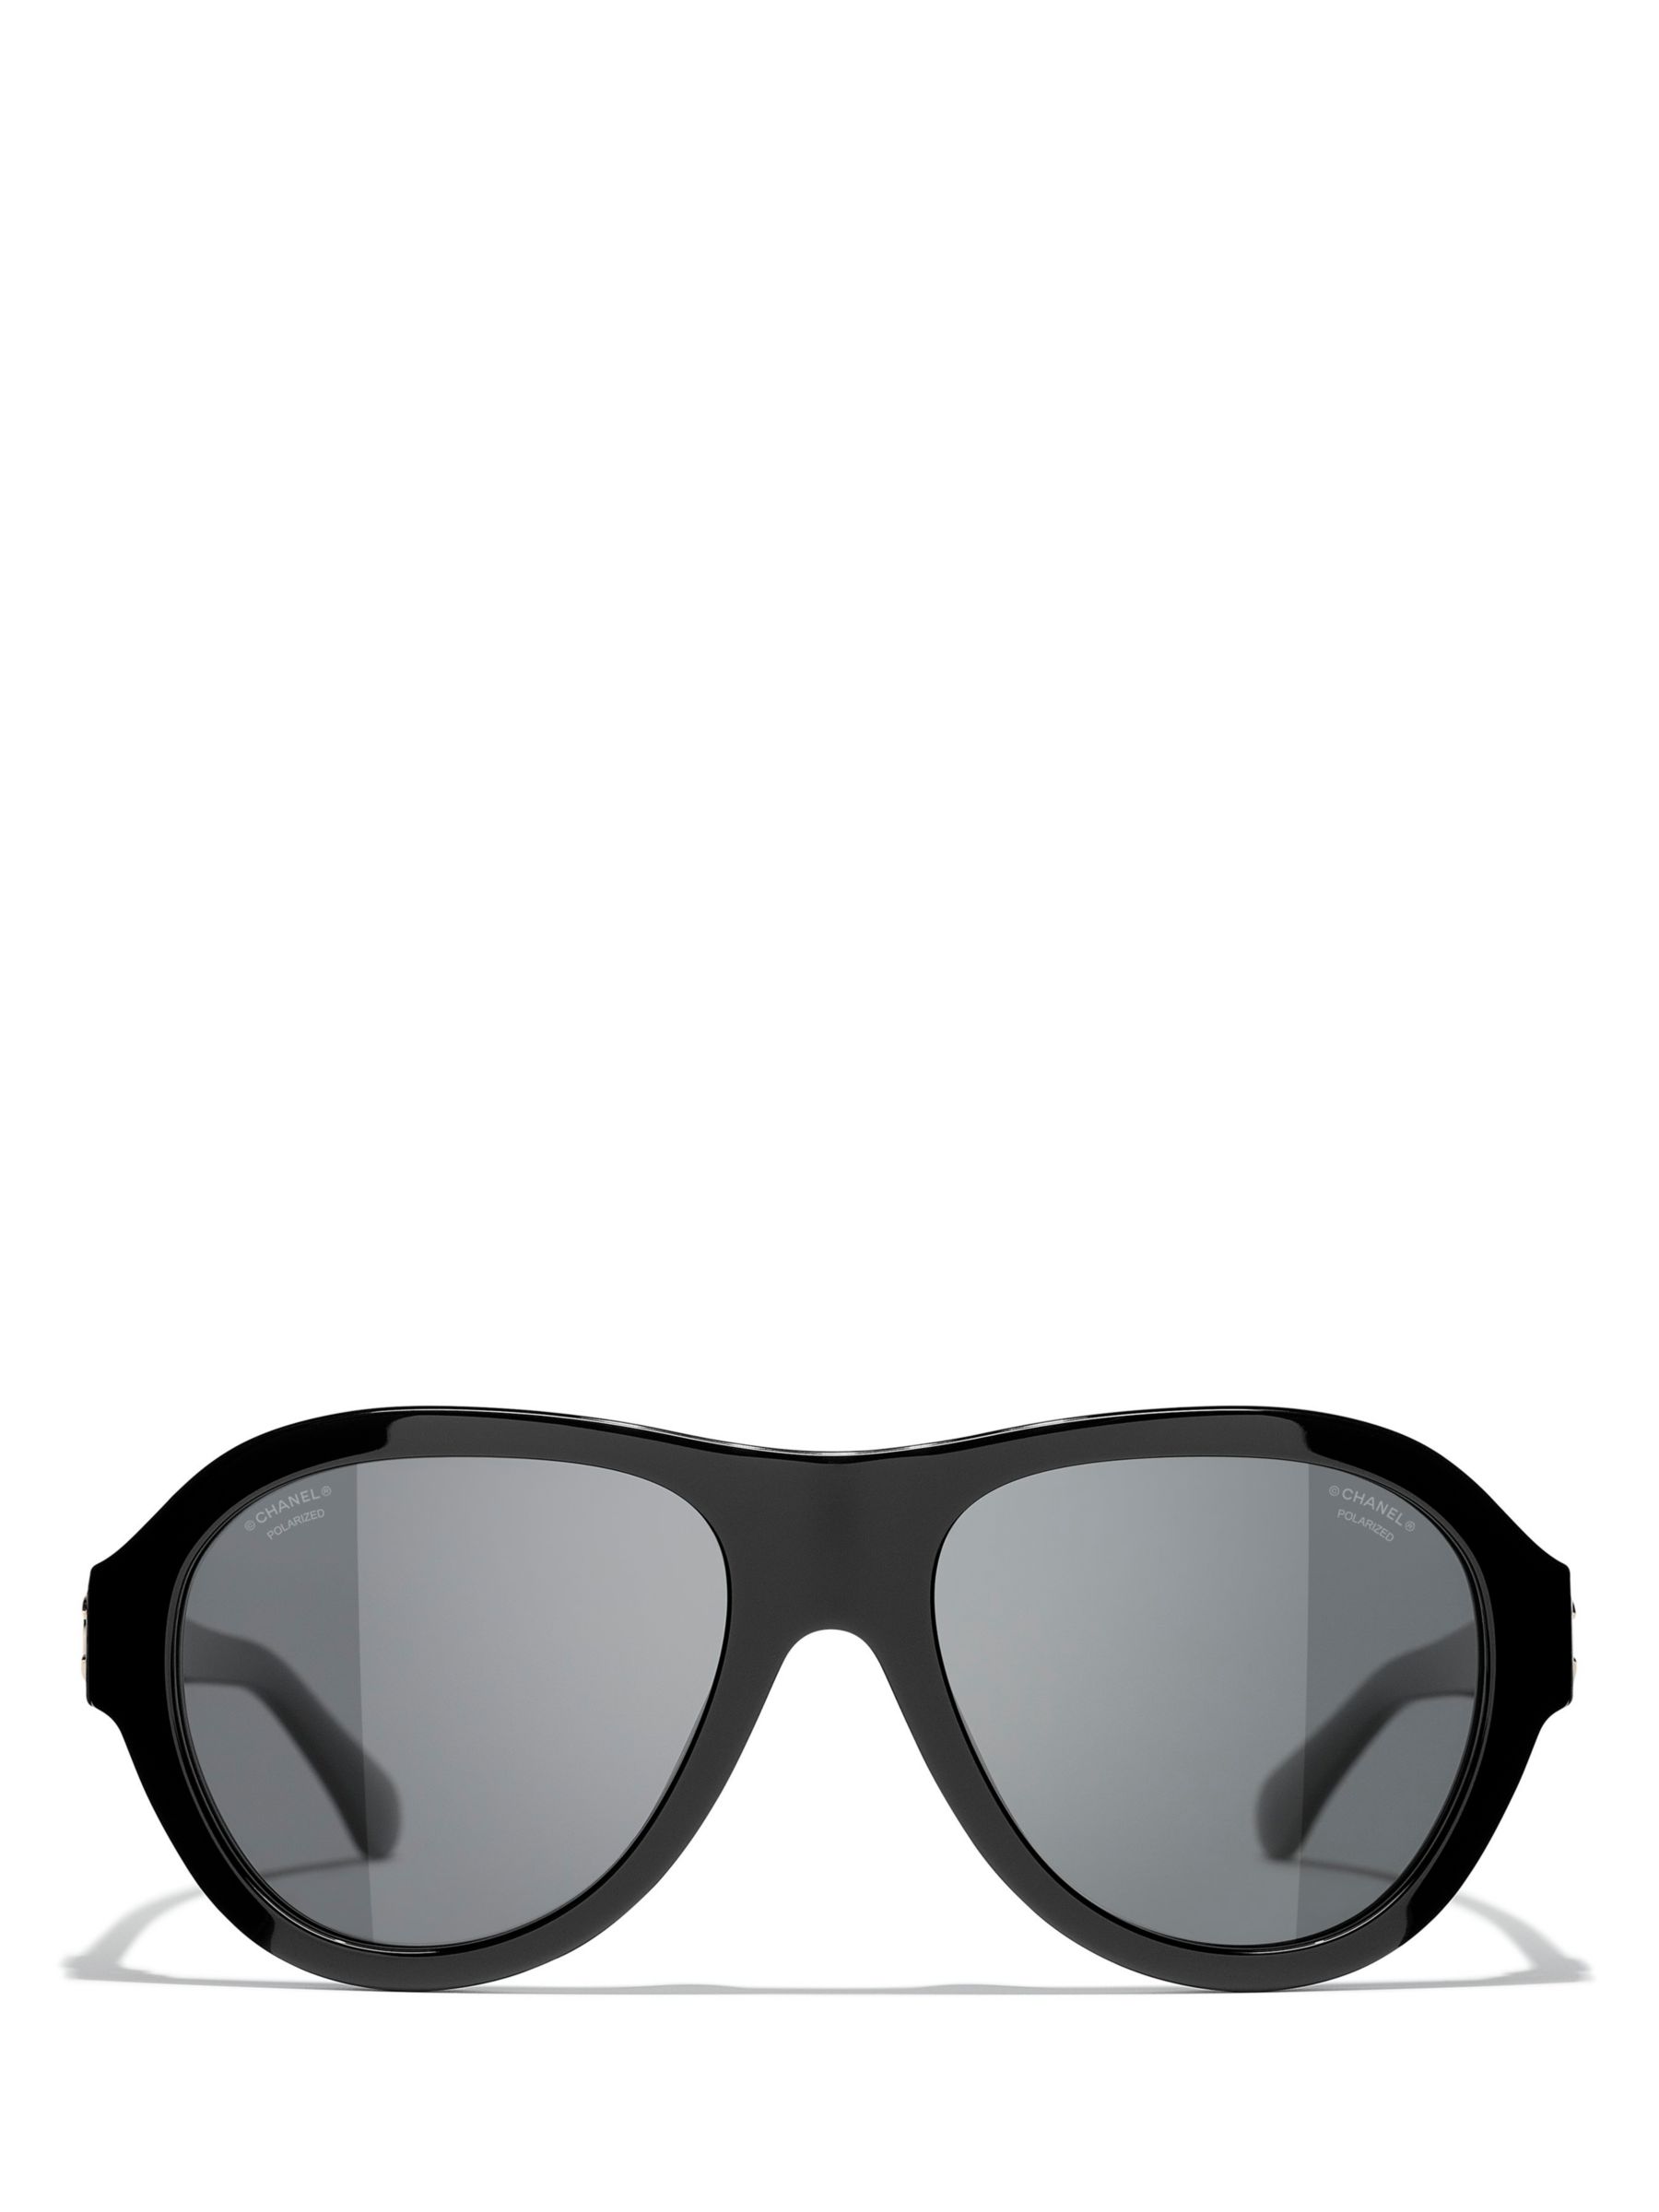 Chanel Oval Sunglasses CH5440 Black/Grey Gradient - ShopStyle